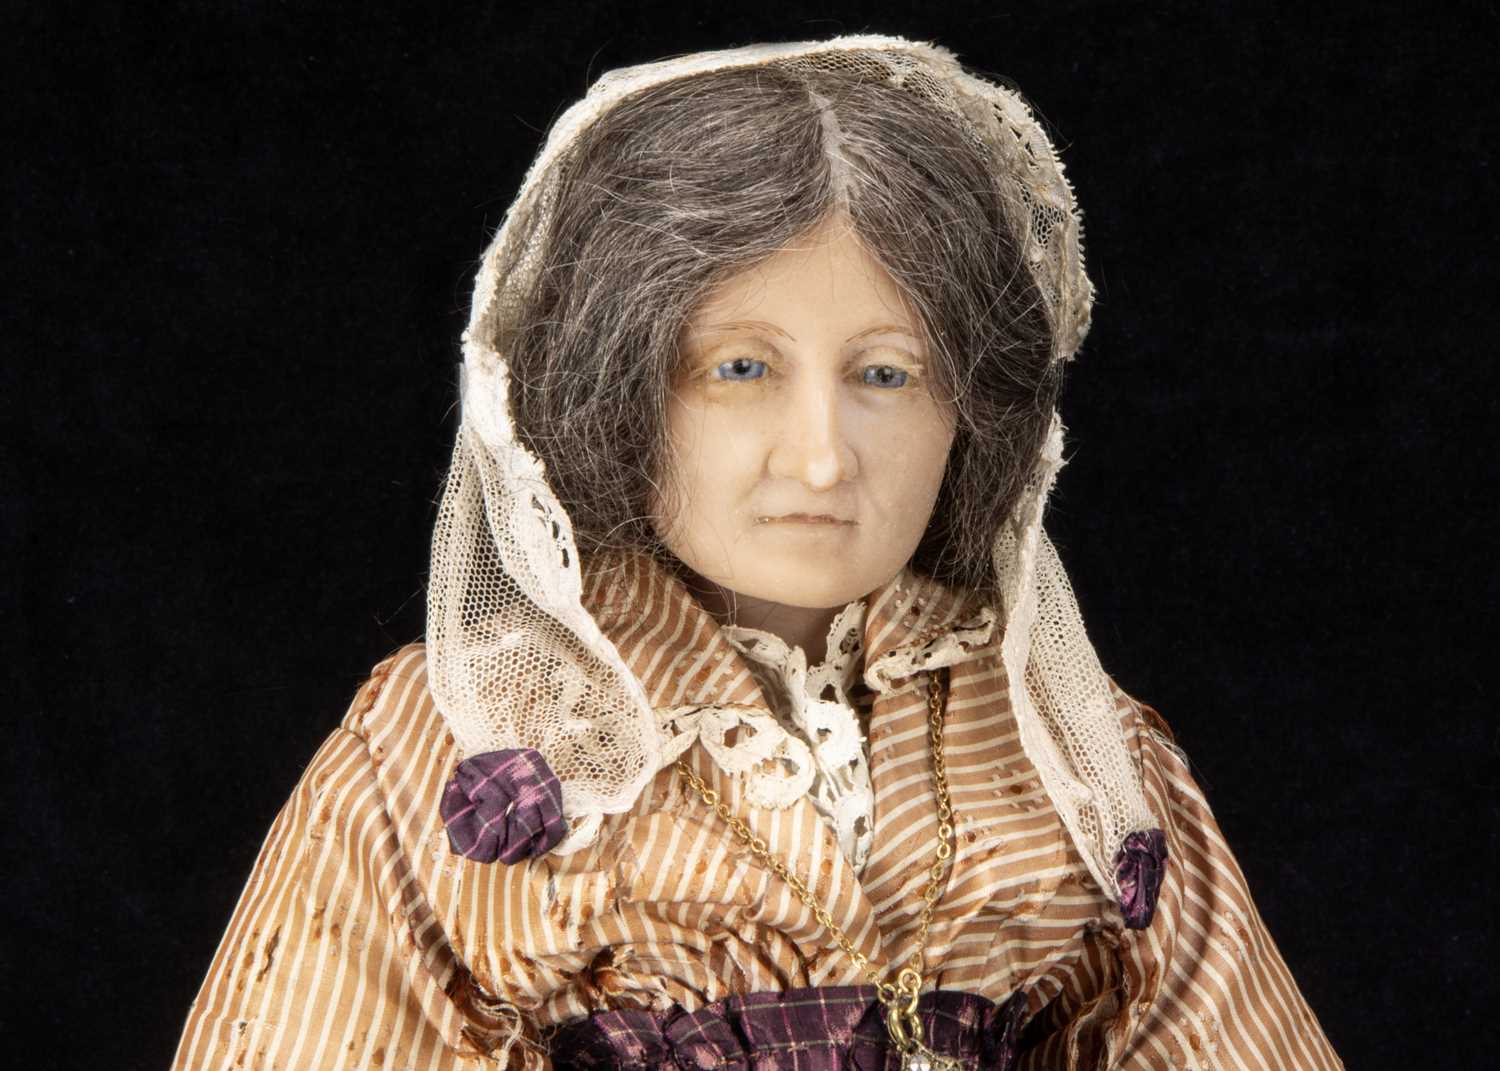 A very rare Pierotti poured wax portrait doll of Madame Tussauds, - Image 3 of 4